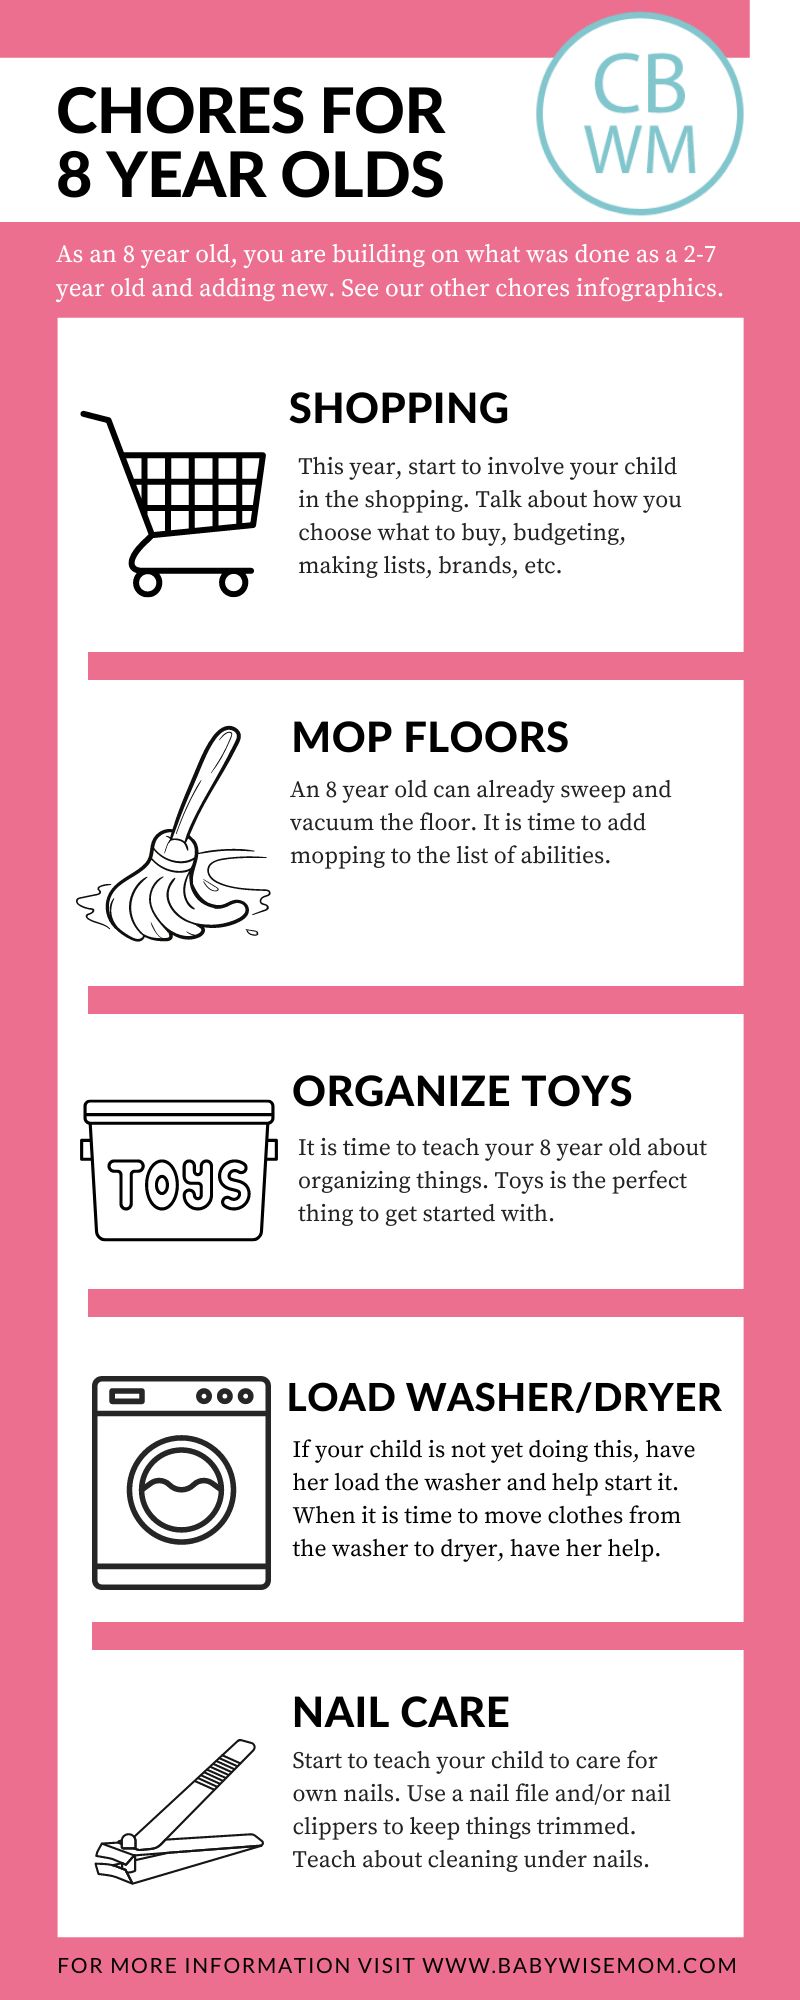 Chores for 8 year olds